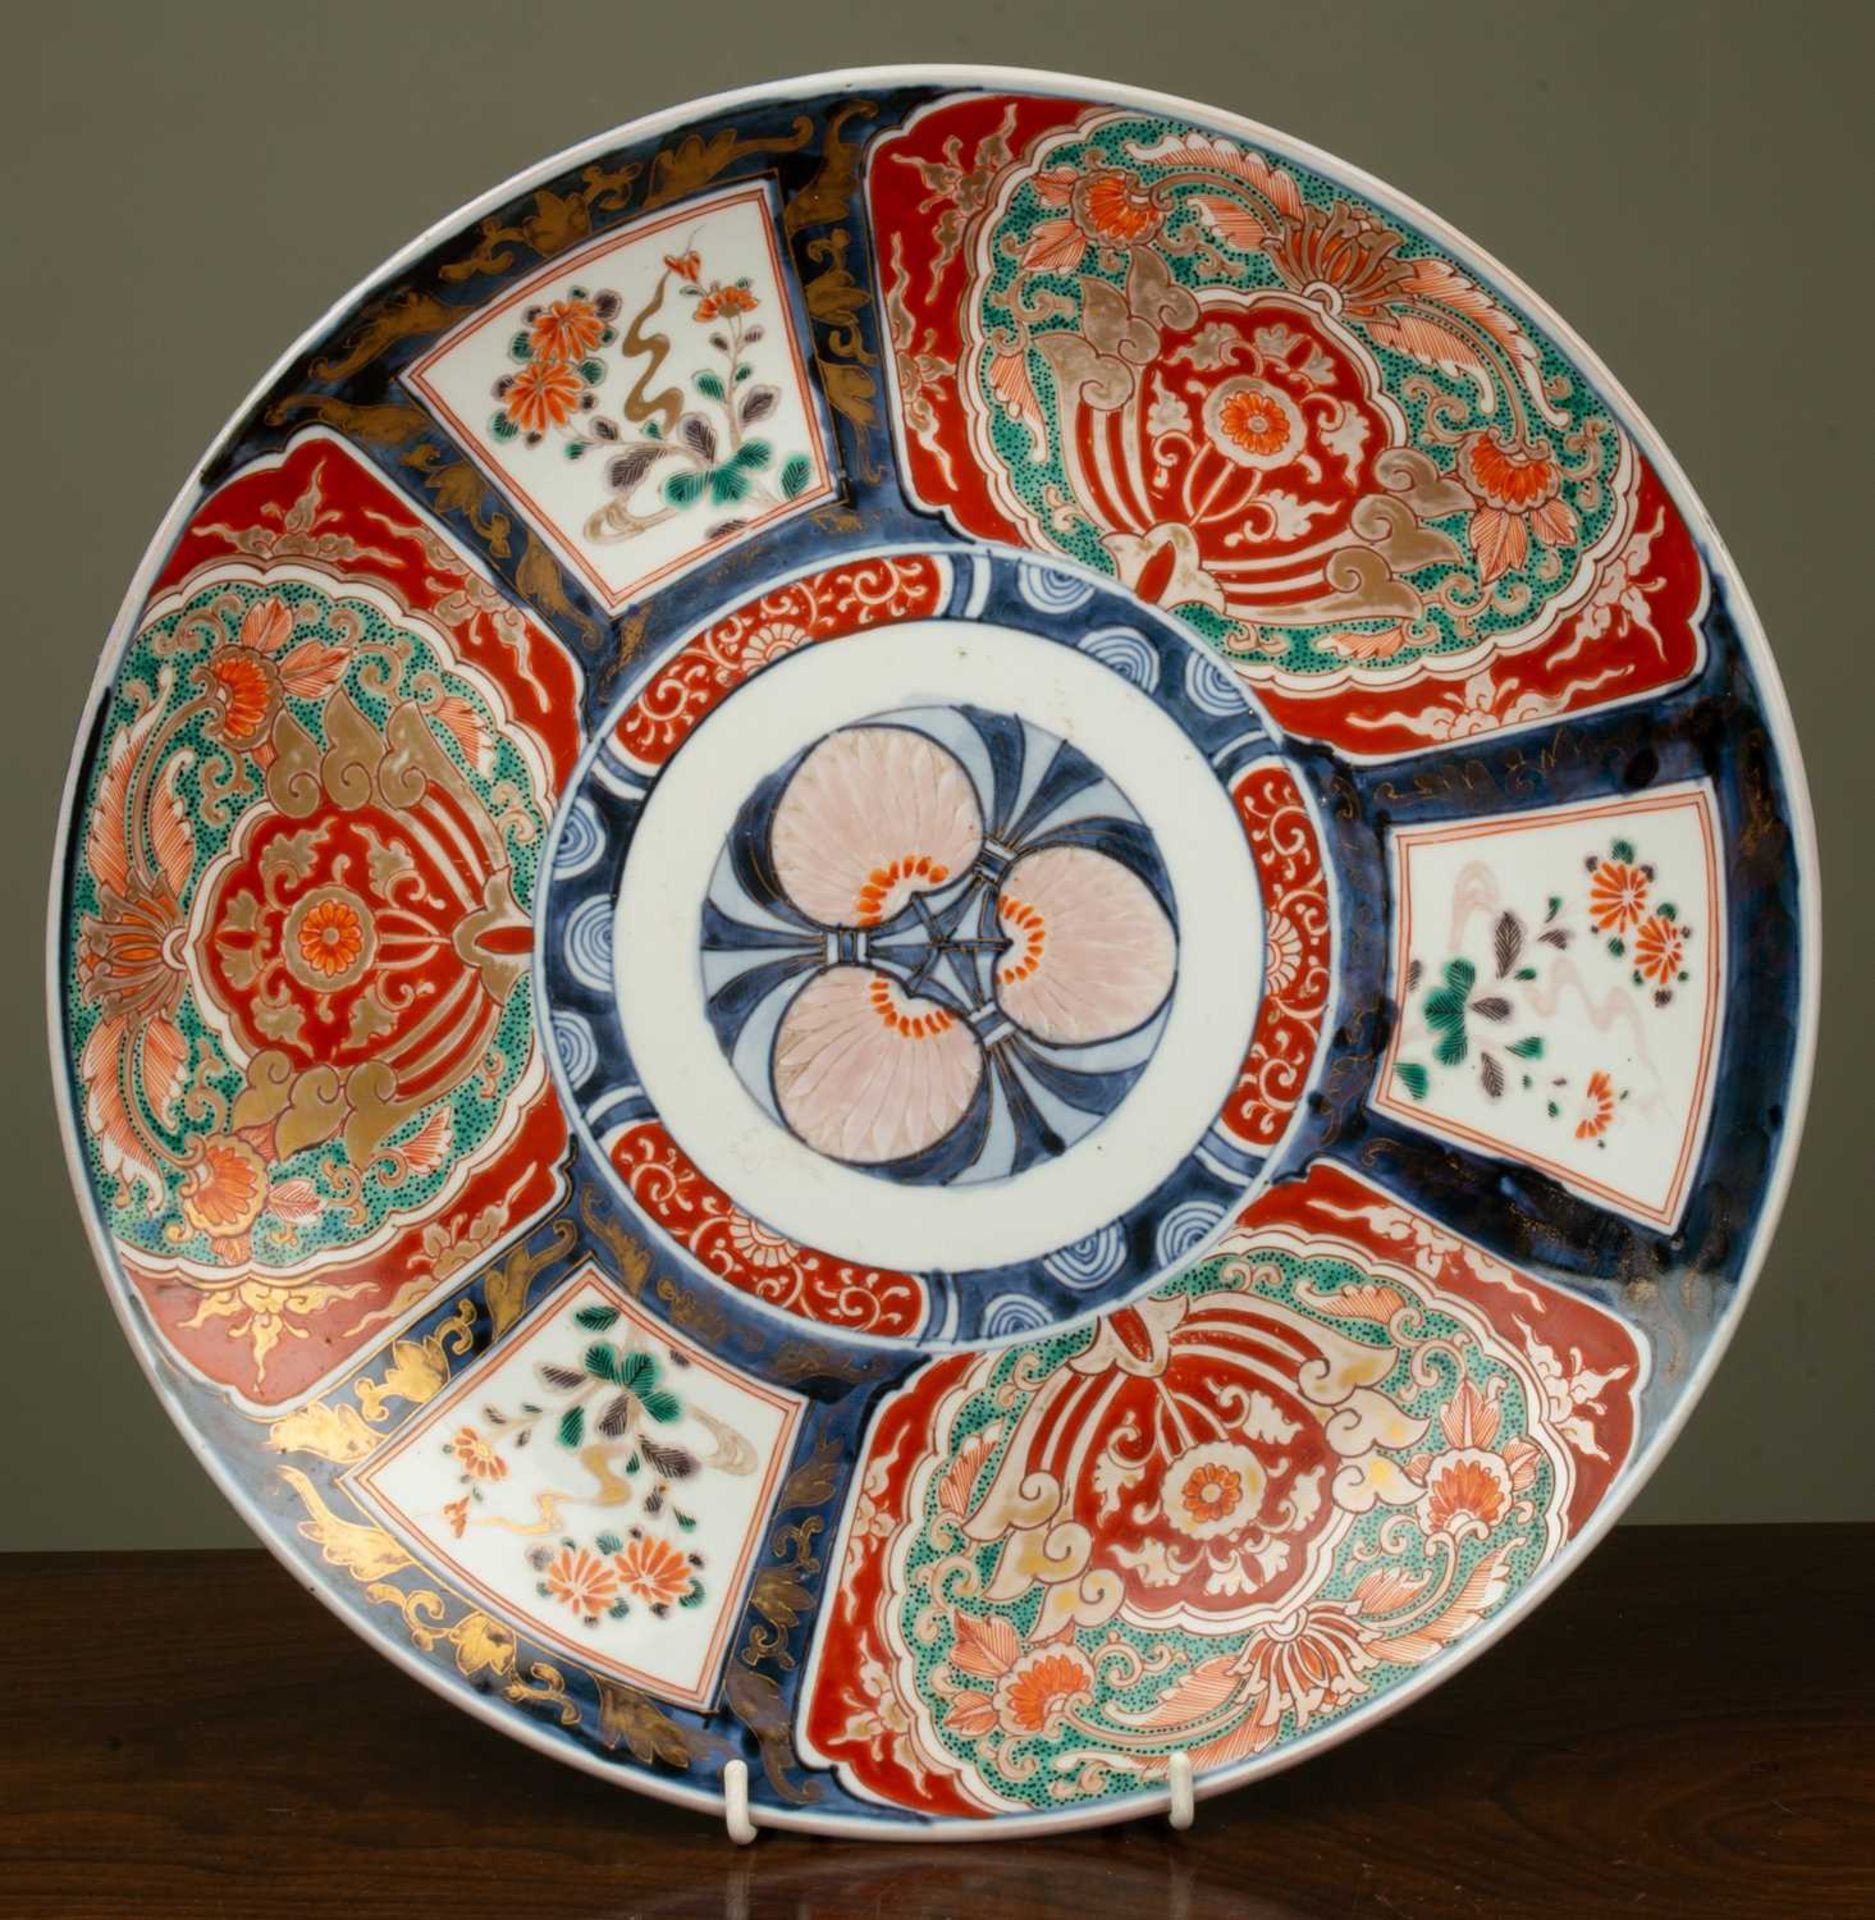 A 19th century Japanese charger, with central stylised flower medallion surrounded by panels of